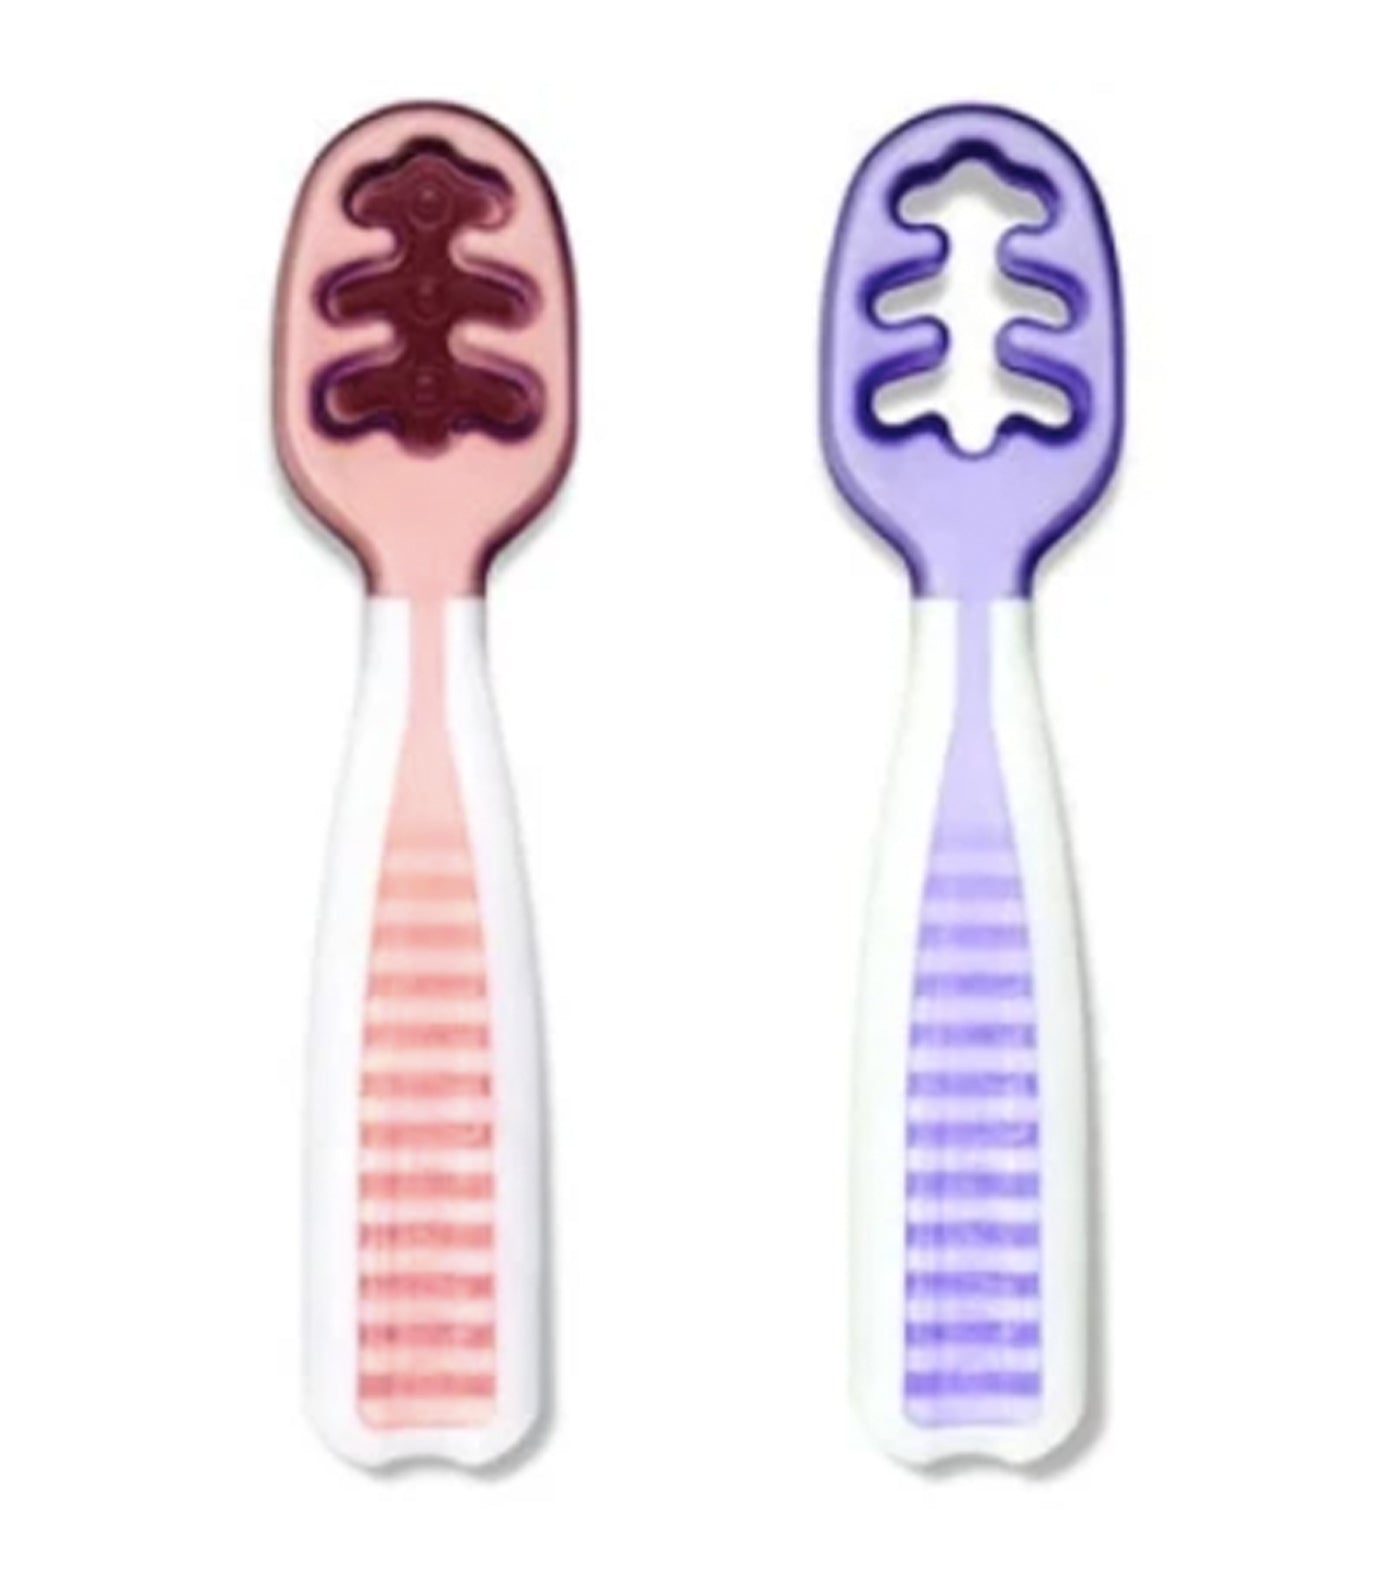 NumNum Pre-Spoon GOOtensil Silicone Baby Spoon (2 Pack) - Lilac